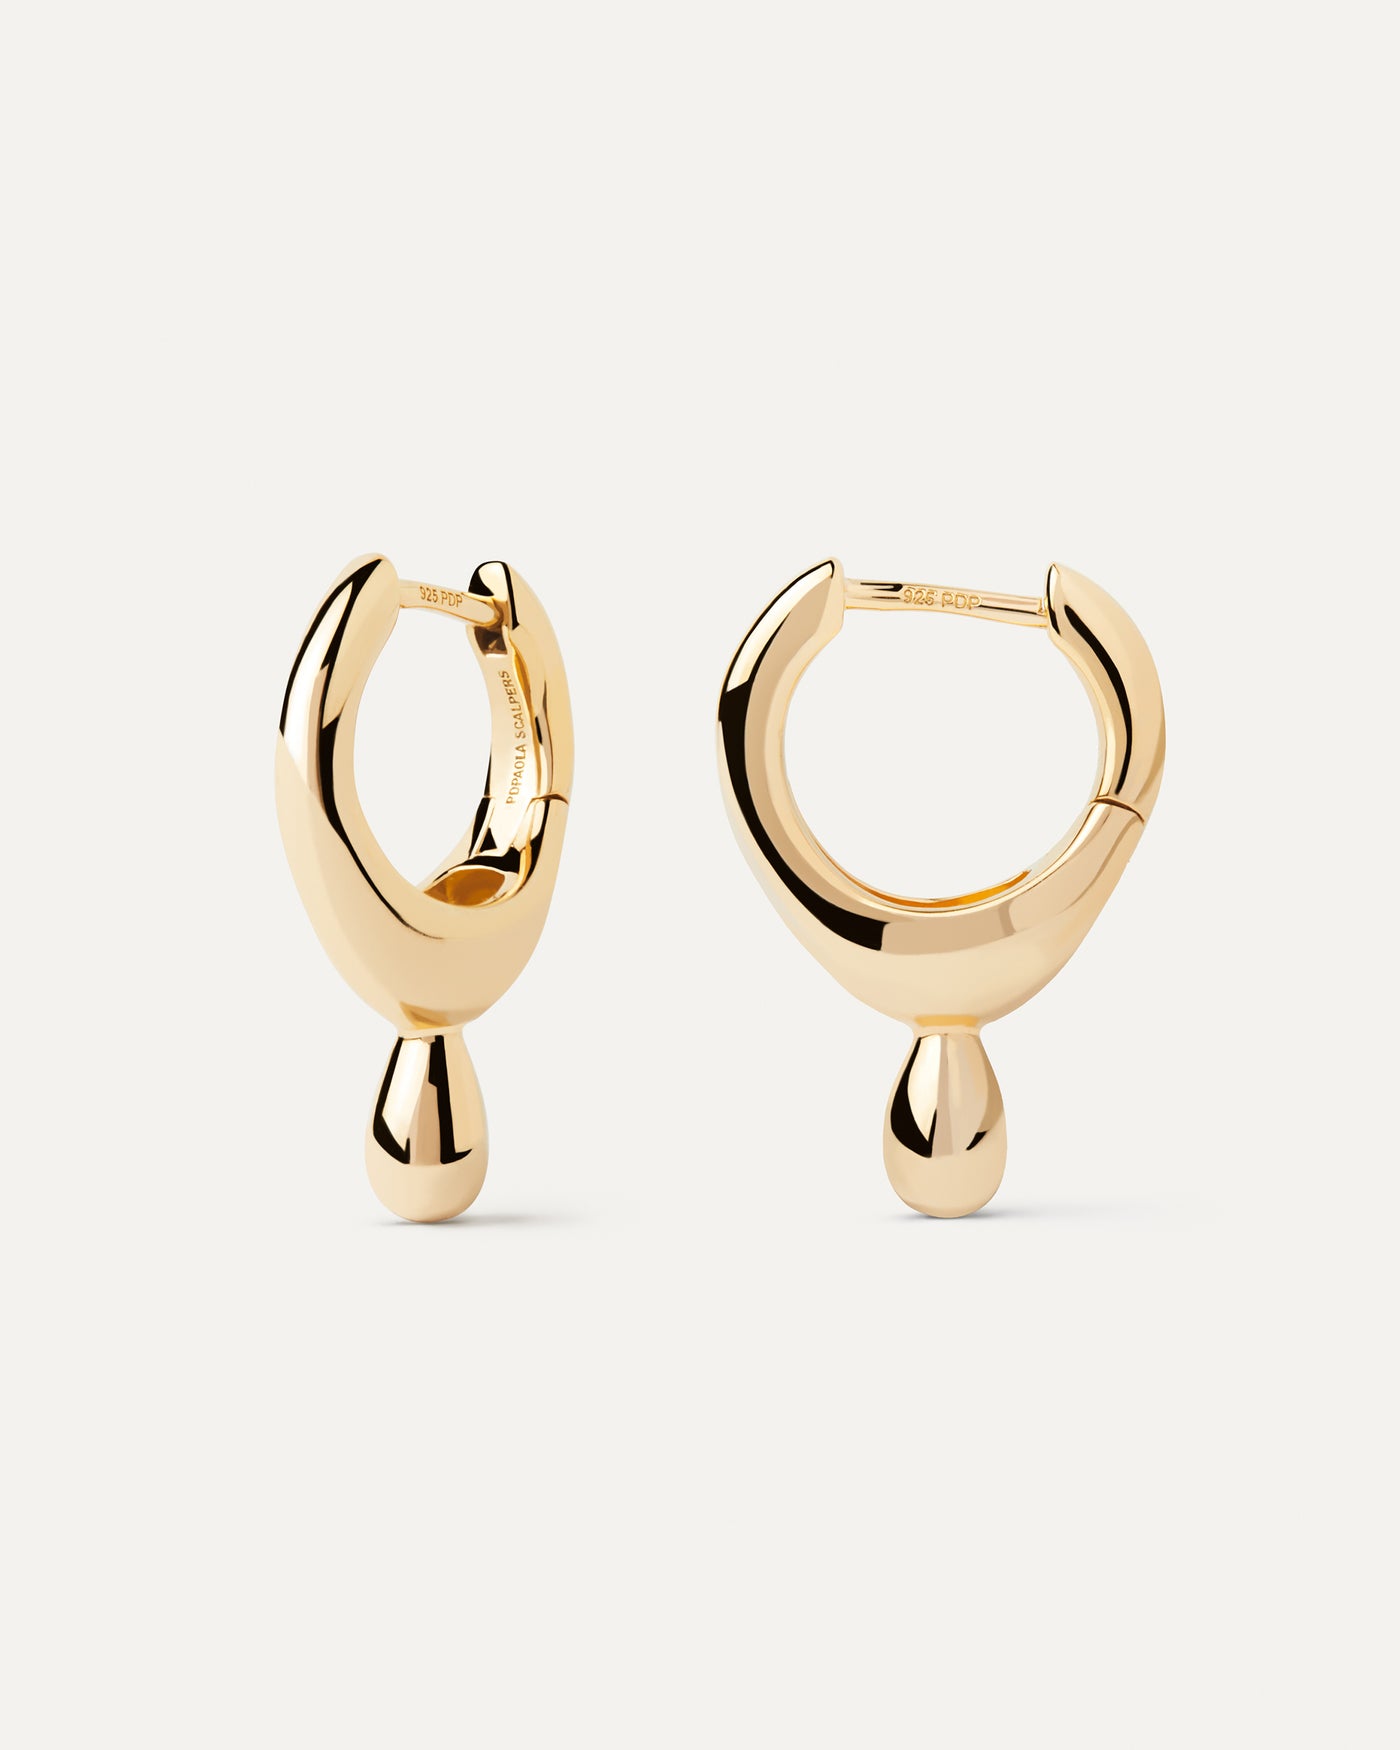 2023 Selection | Lava Hoops. Gold-plated fluid shape hoop earrings with a drop pendant. Get the latest arrival from PDPAOLA. Place your order safely and get this Best Seller. Free Shipping.